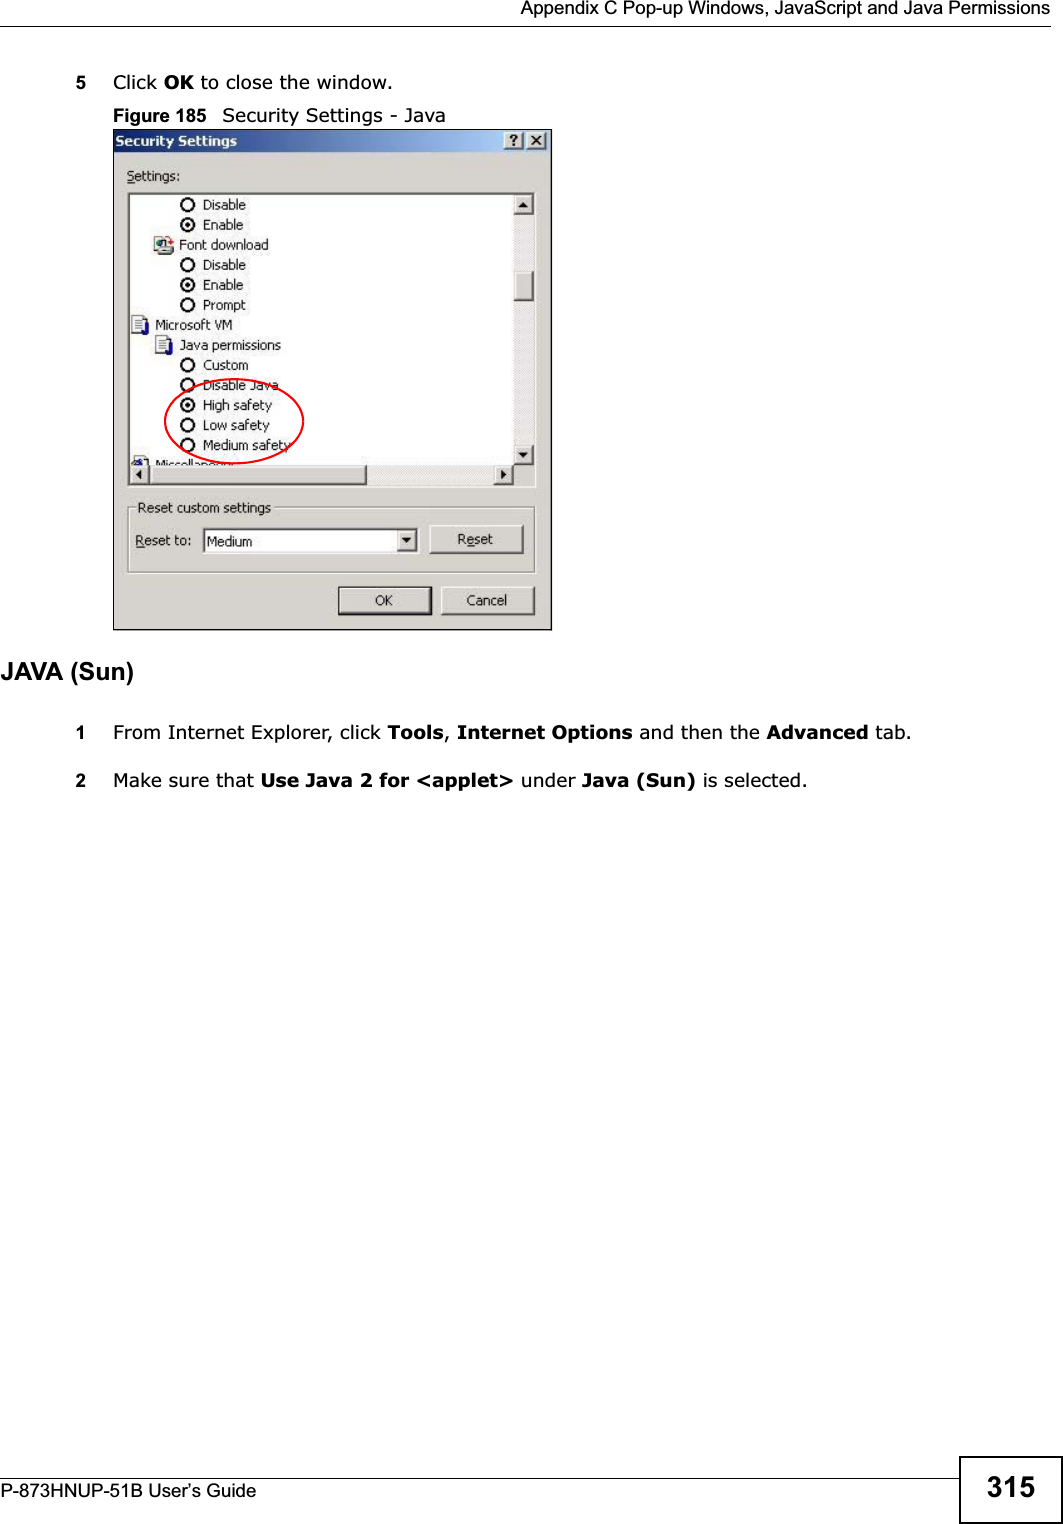  Appendix C Pop-up Windows, JavaScript and Java PermissionsP-873HNUP-51B User’s Guide 3155Click OK to close the window.Figure 185   Security Settings - Java JAVA (Sun)1From Internet Explorer, click Tools,Internet Options and then the Advanced tab. 2Make sure that Use Java 2 for &lt;applet&gt; under Java (Sun) is selected.